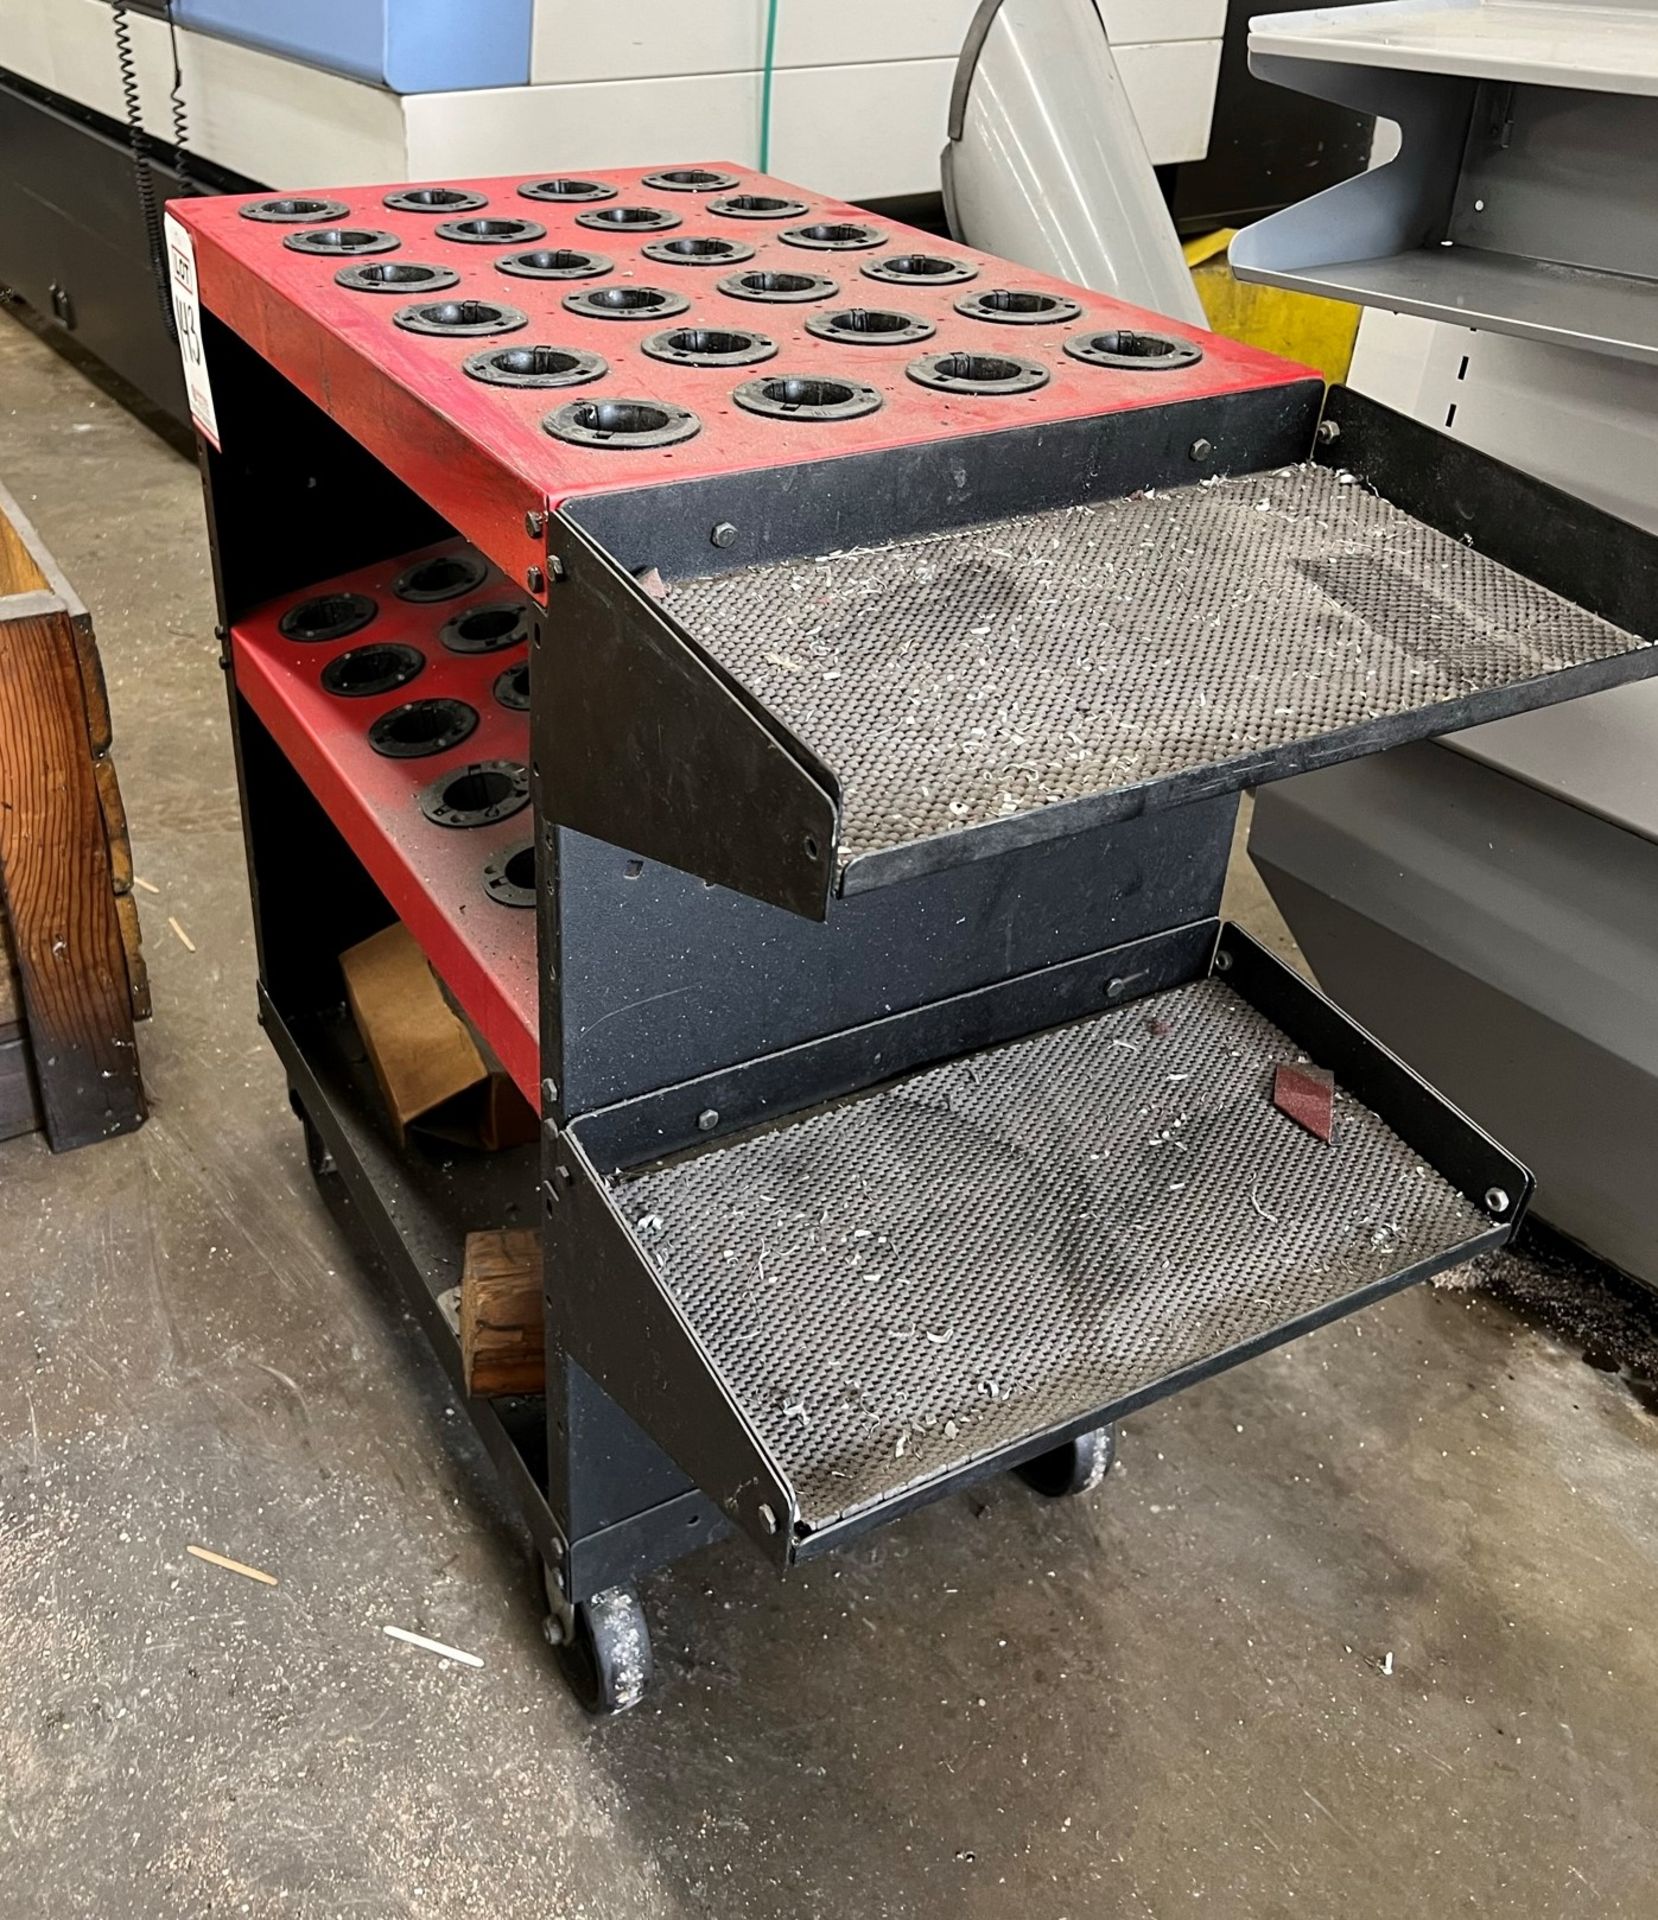 CAT 40 TOOL CART, HOLDS (48) TOOL HOLDERS, CART ONLY - NO TOOL HOLDERS - Image 2 of 2